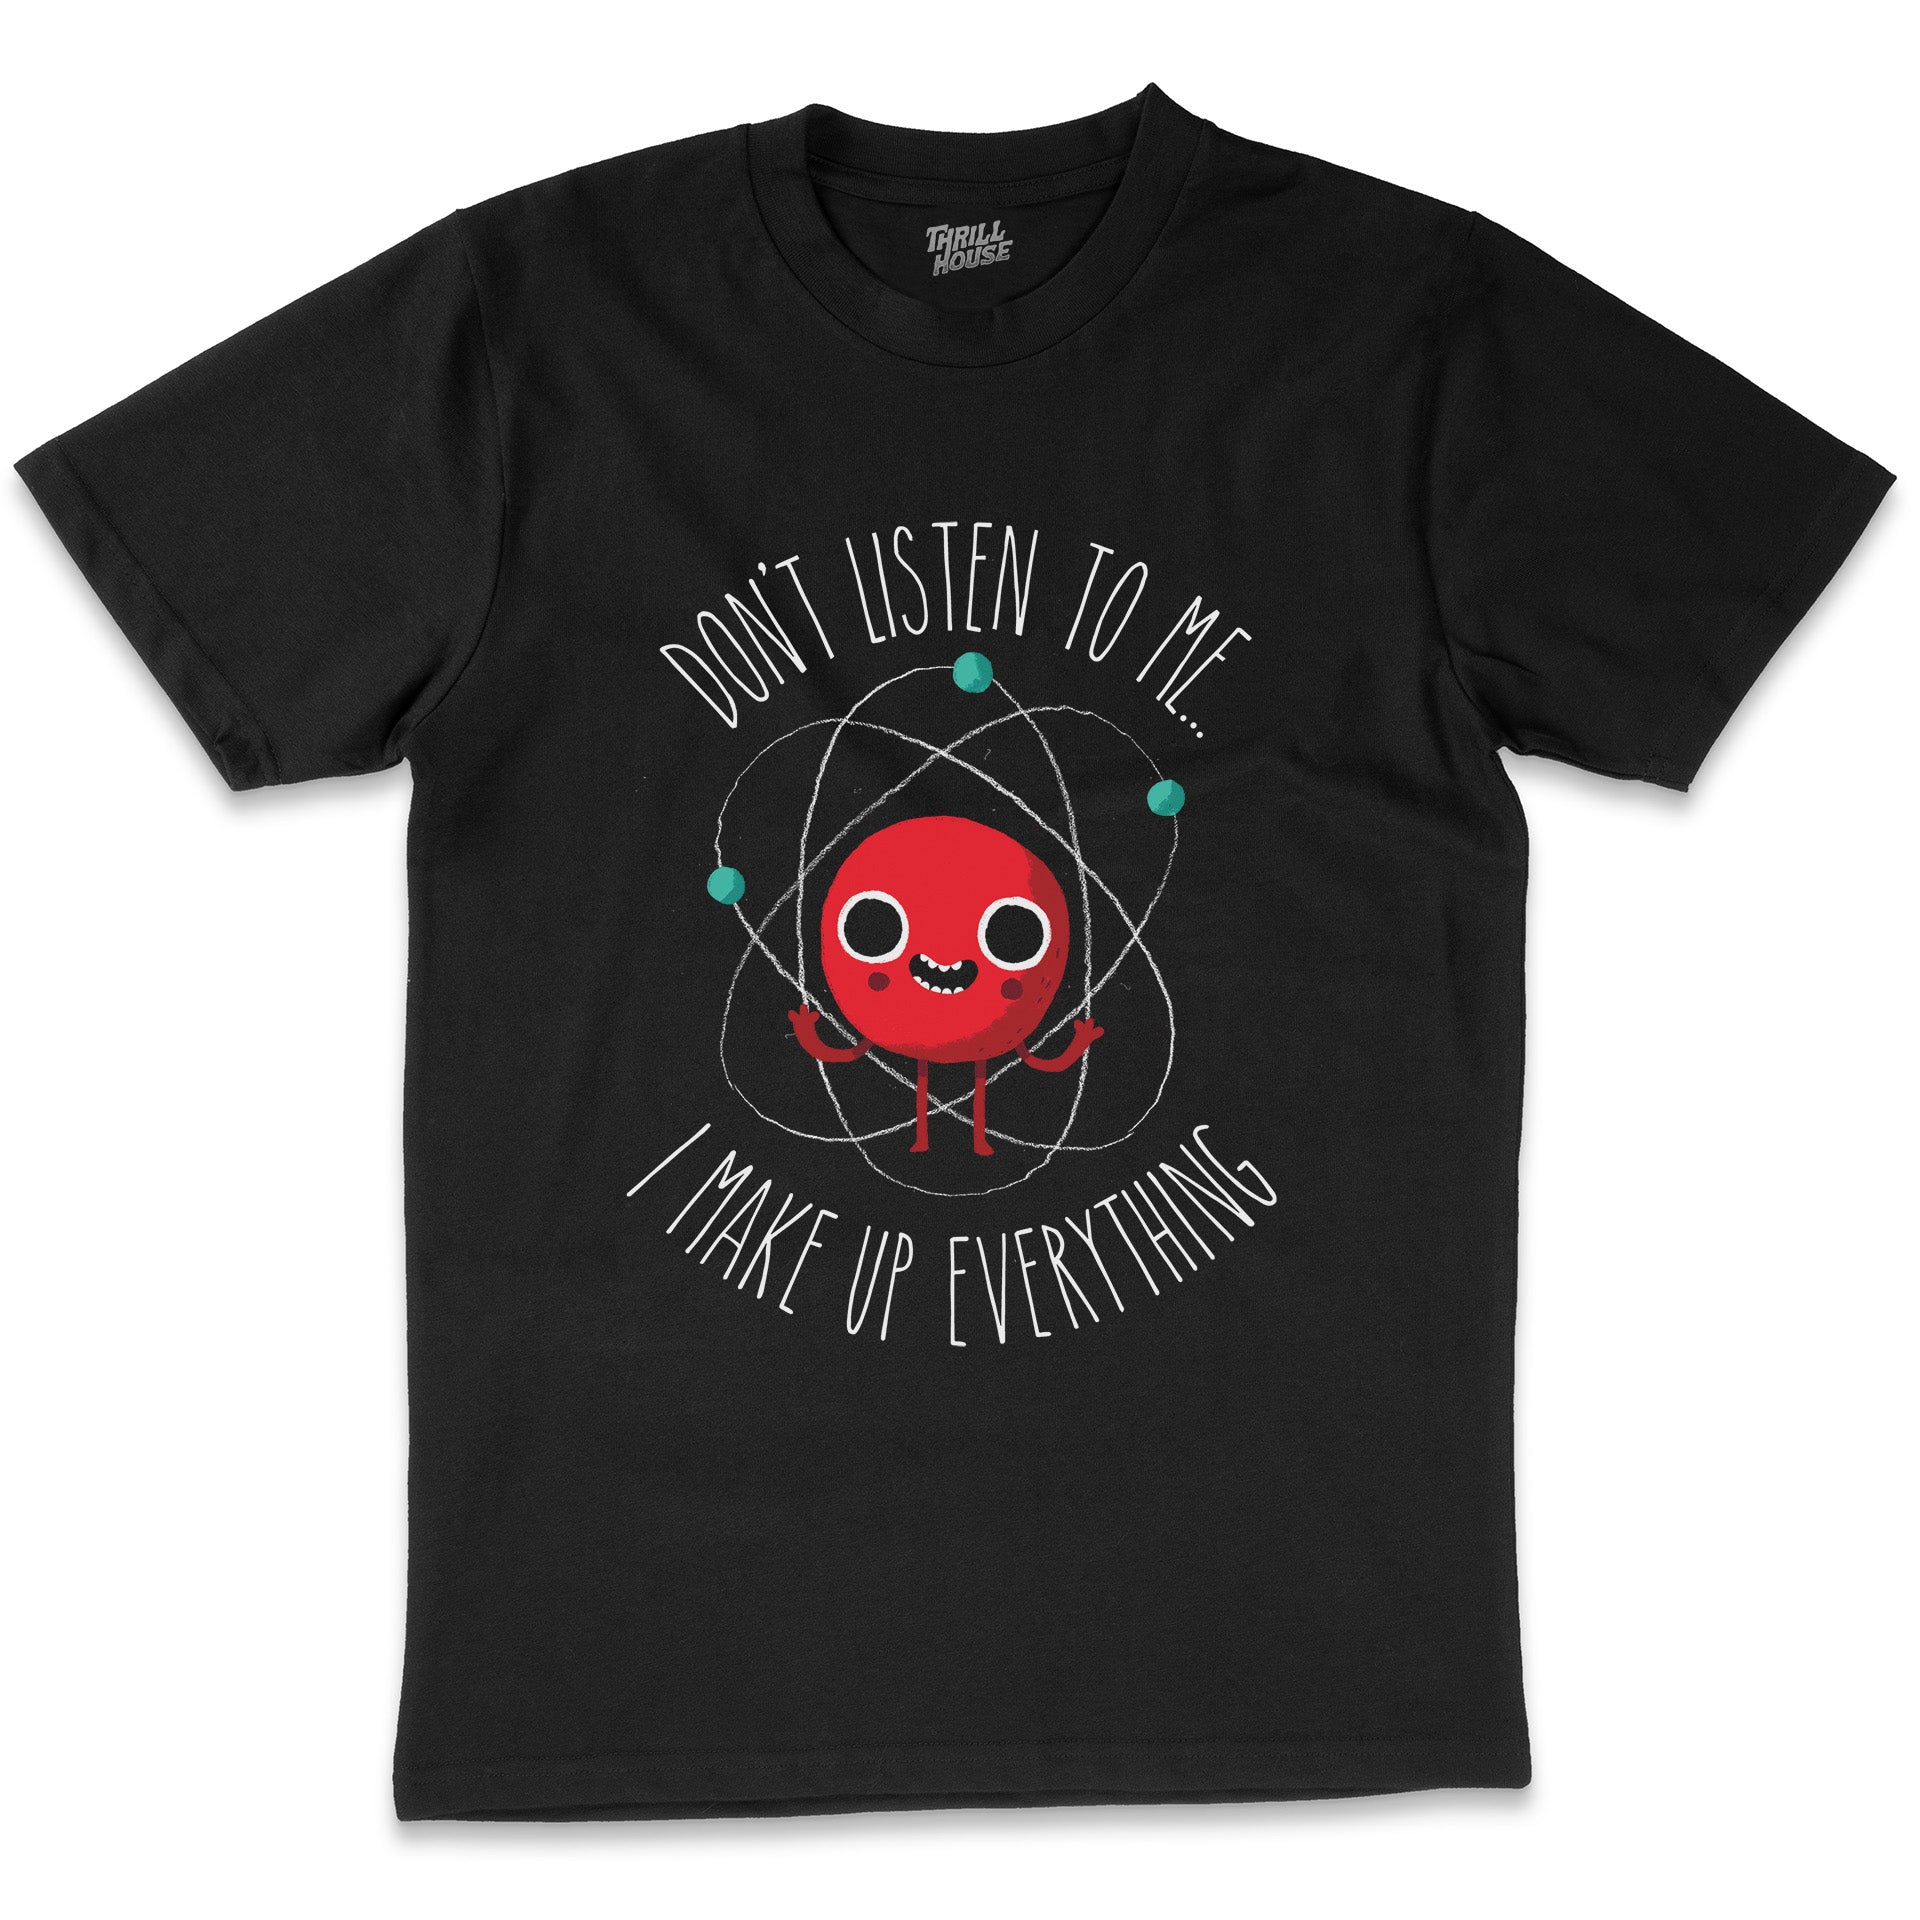 Never Trust An Atom I Make Up Everything Funny Science Geek Nerd Humour Cotton T-Shirt